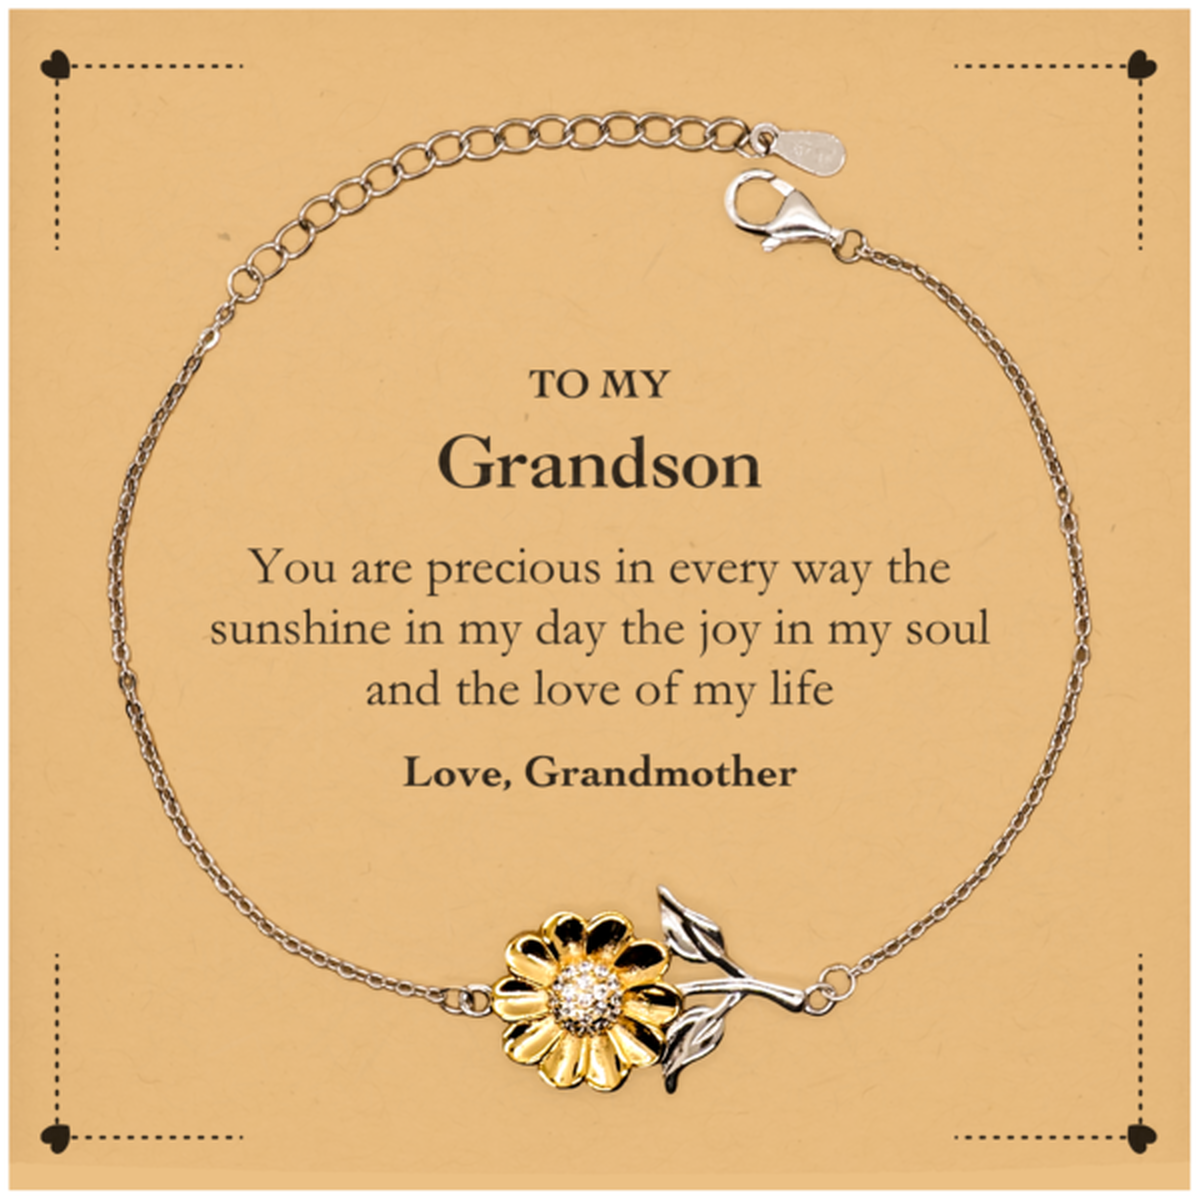 Graduation Gifts for Grandson Sunflower Bracelet Present from Grandmother, Christmas Grandson Birthday Gifts Grandson You are precious in every way the sunshine in my day. Love, Grandmother